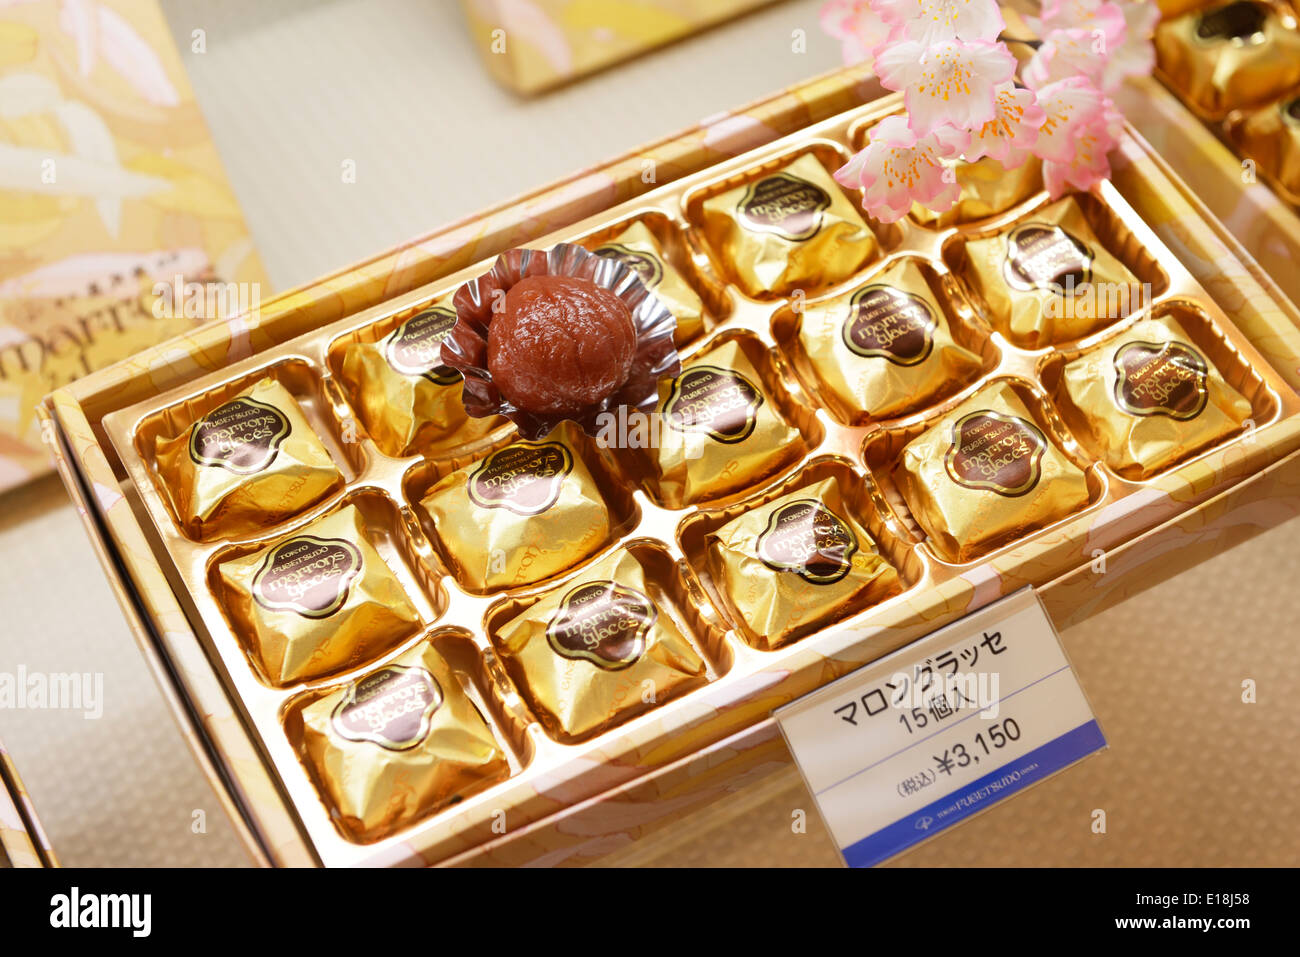 Marron glaces candied chestnut confections in a box at Japanese store. Tokyo, Japan. Stock Photo